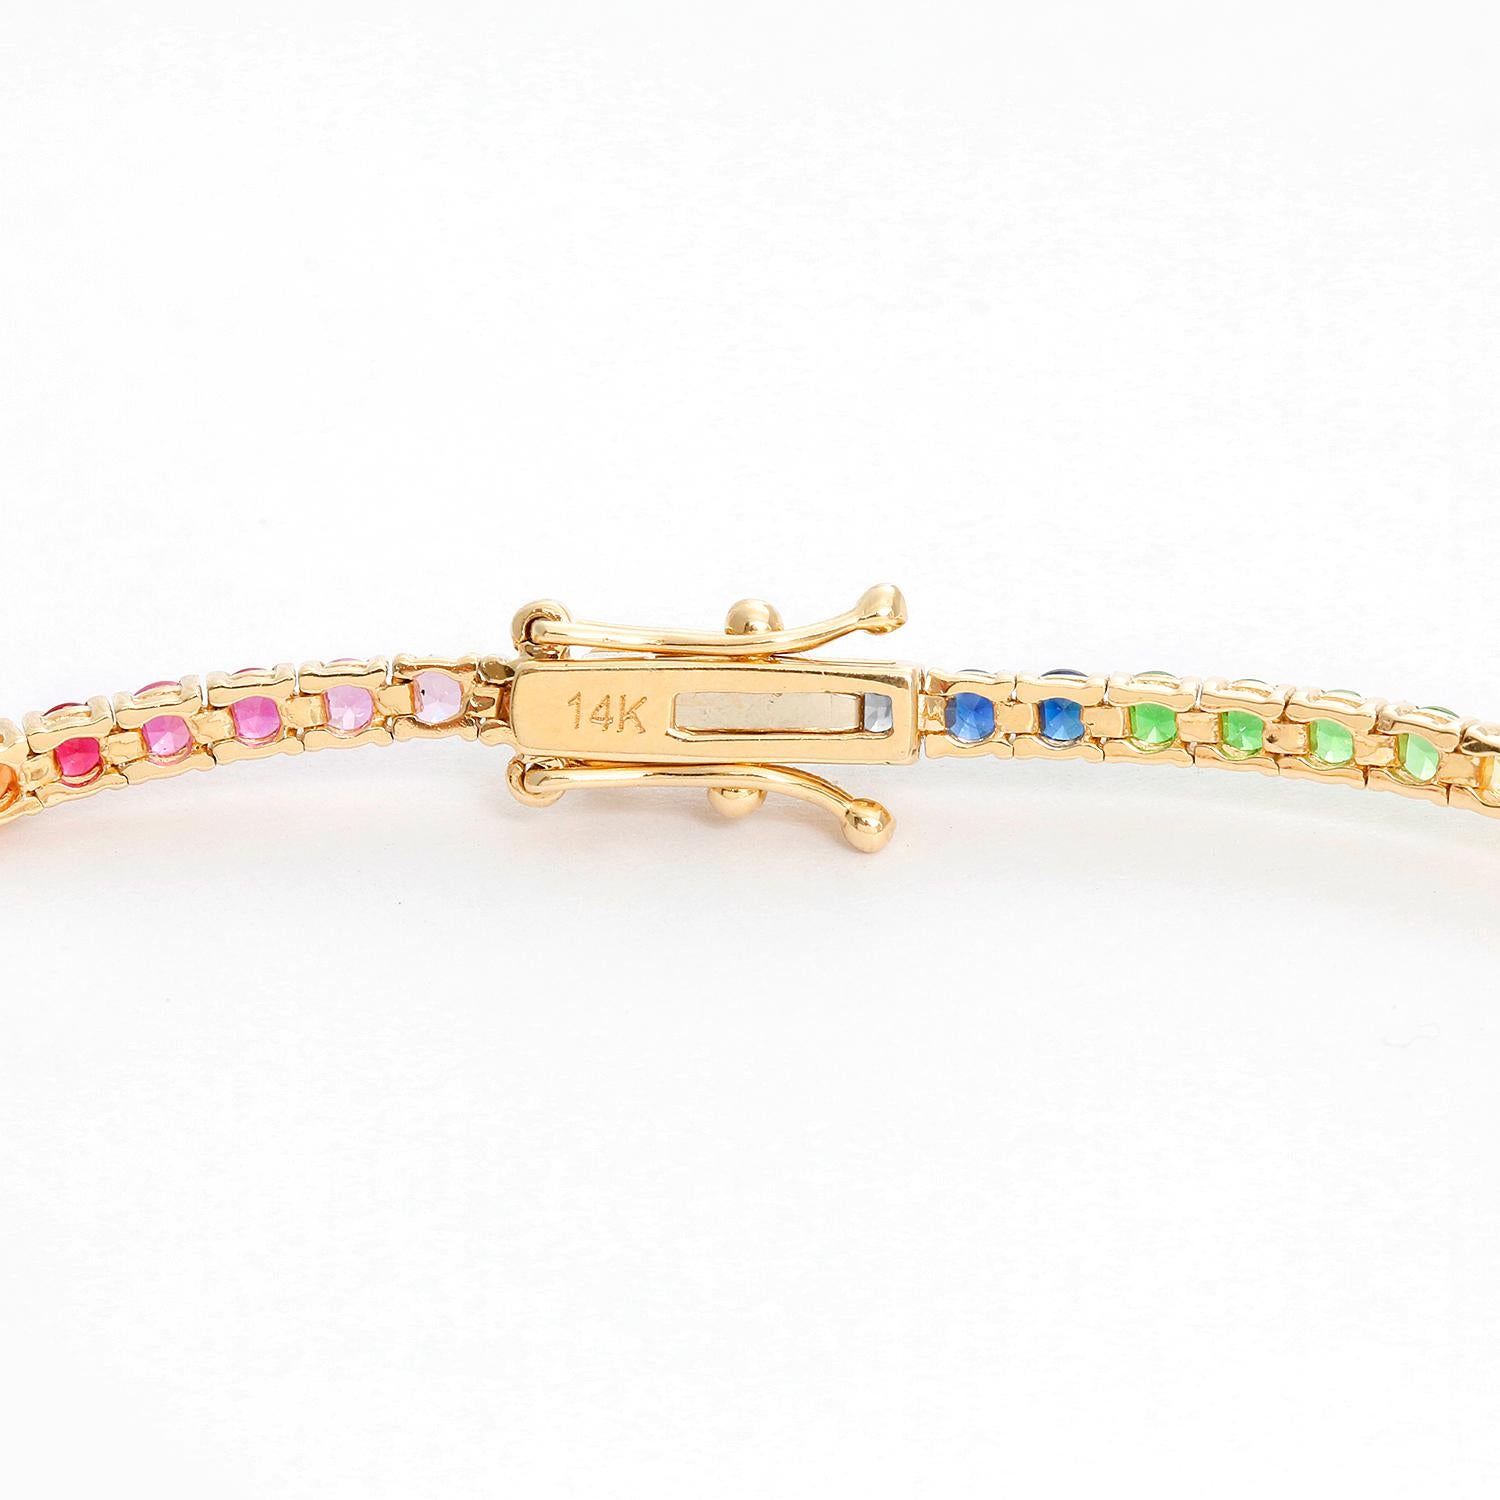 14K Yellow Gold Rainbow Sapphire Bracelet - Beautiful 4.08 cts of rainbow Sapphires. This tennis bracelet features a multicolored gradient of 2.37mm round brilliant sapphires.  Total weight 6.5 grams. Wrist size up to 7 inches .